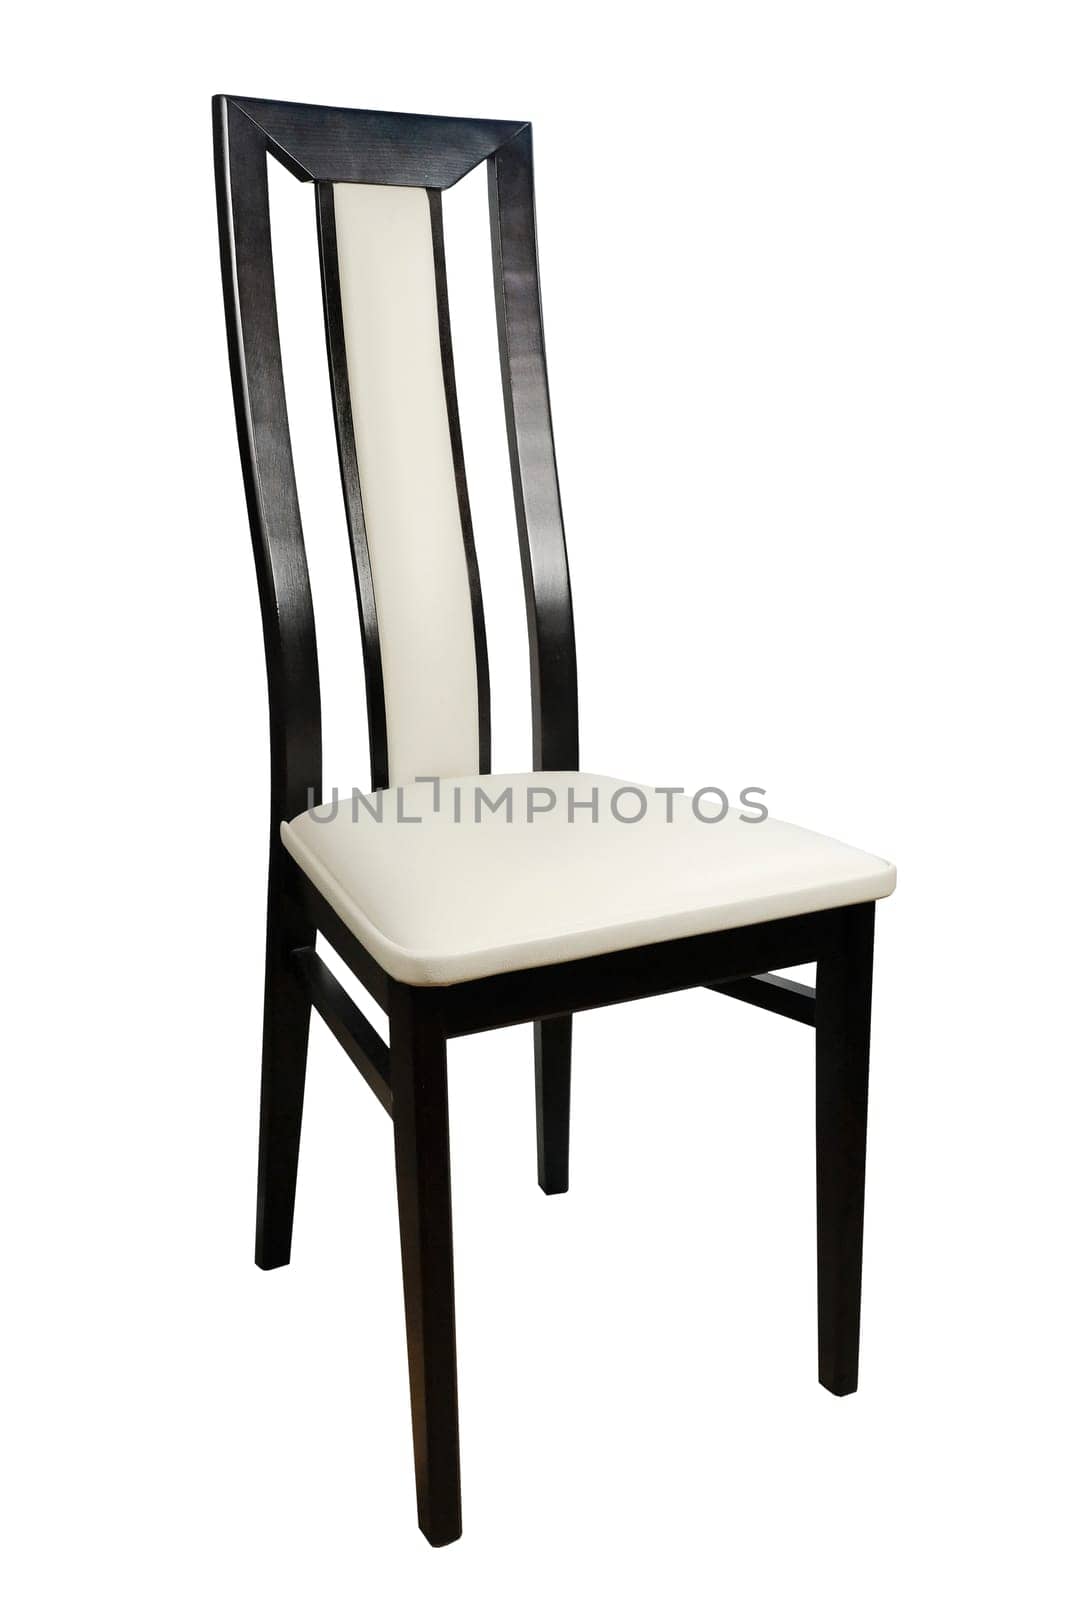 Wooden leather chair isolated on a white background.